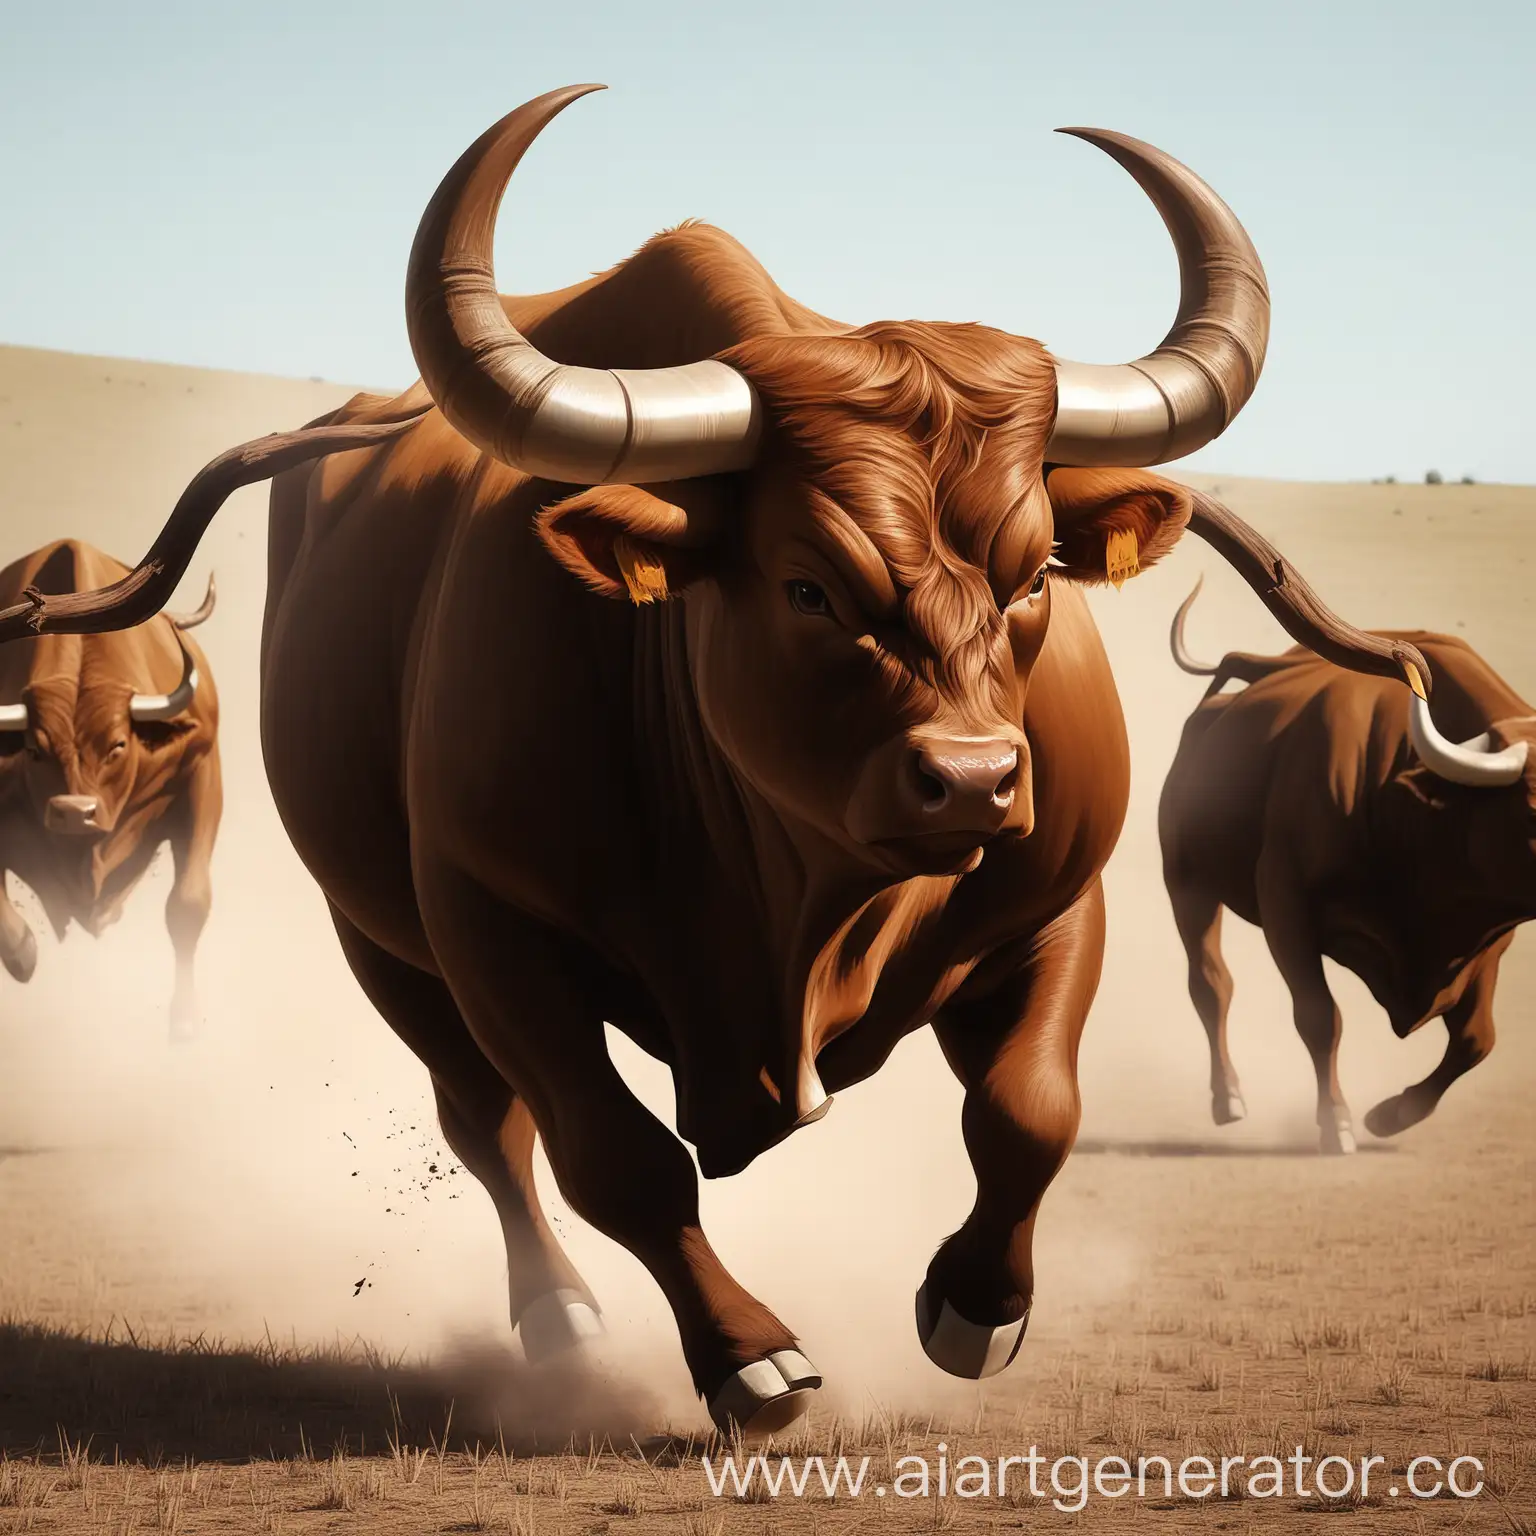 Ferocious-Brown-Bull-Charging-with-Powerful-Horns